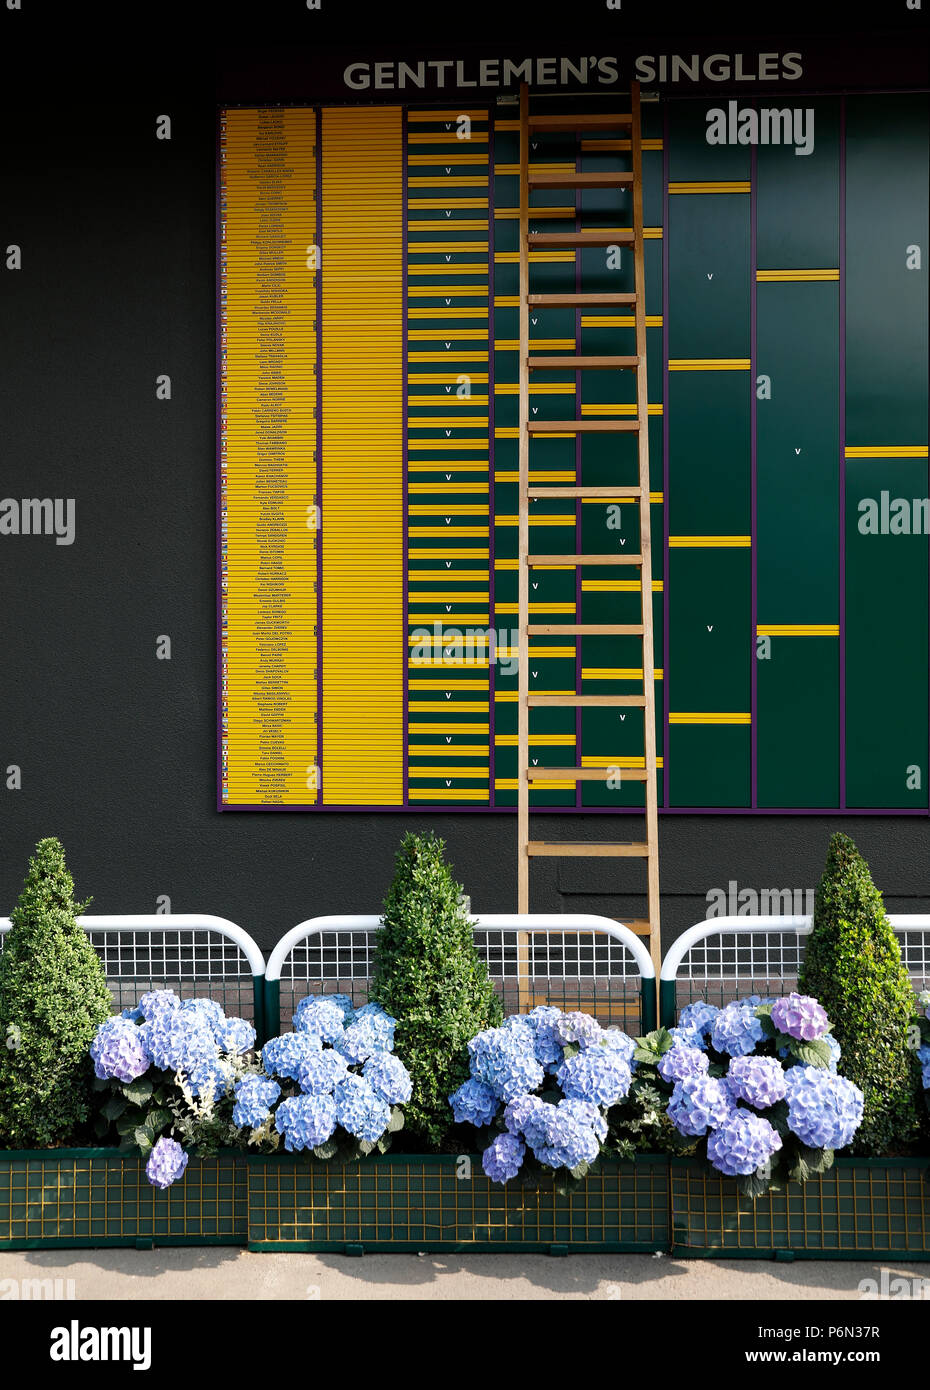 A general view of the order of play ahead of the 2018 Wimbledon Championships at The All England Lawn Tennis and Croquet Club, Wimbledon.at the All England Lawn Tennis and Croquet Club, Wimbledon. Stock Photo